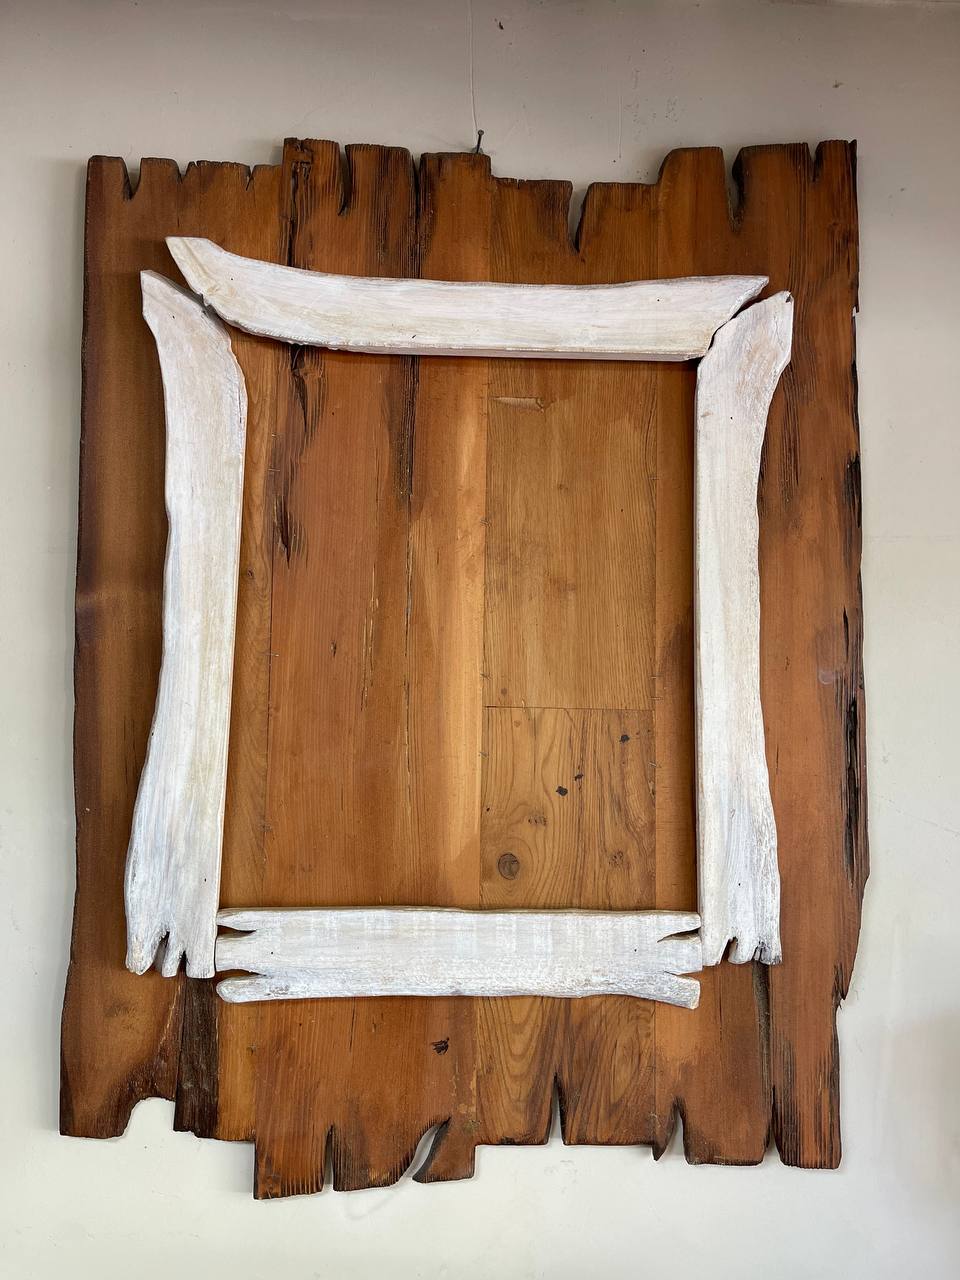 Hand Crafted Natural Edge Frames Created From Red Cedar Driftwood